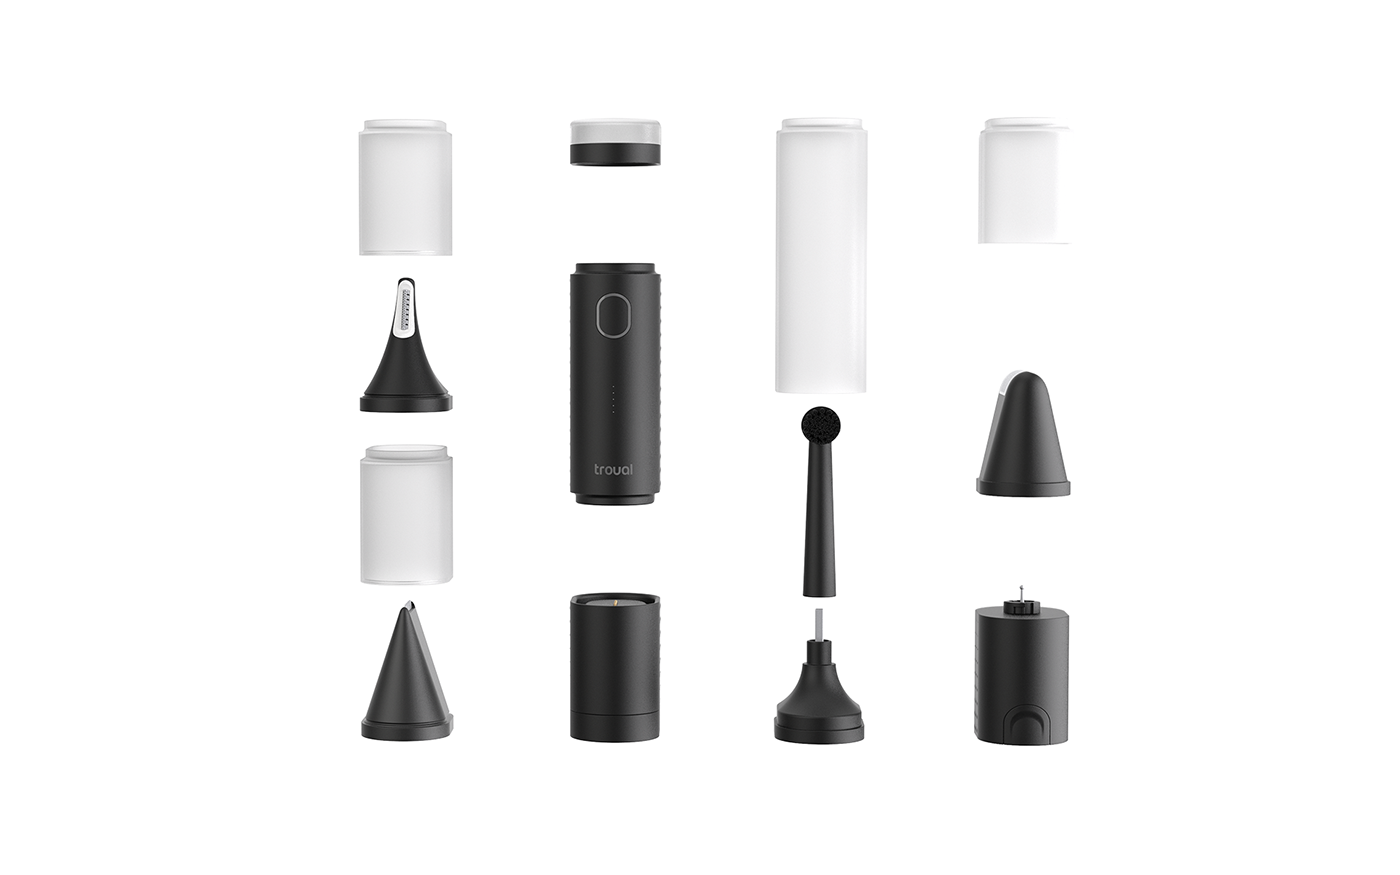 modular travel tools Troval product design  Protable Charger electric toothbrush Razor Sheaver Trimmer fuhuadesign